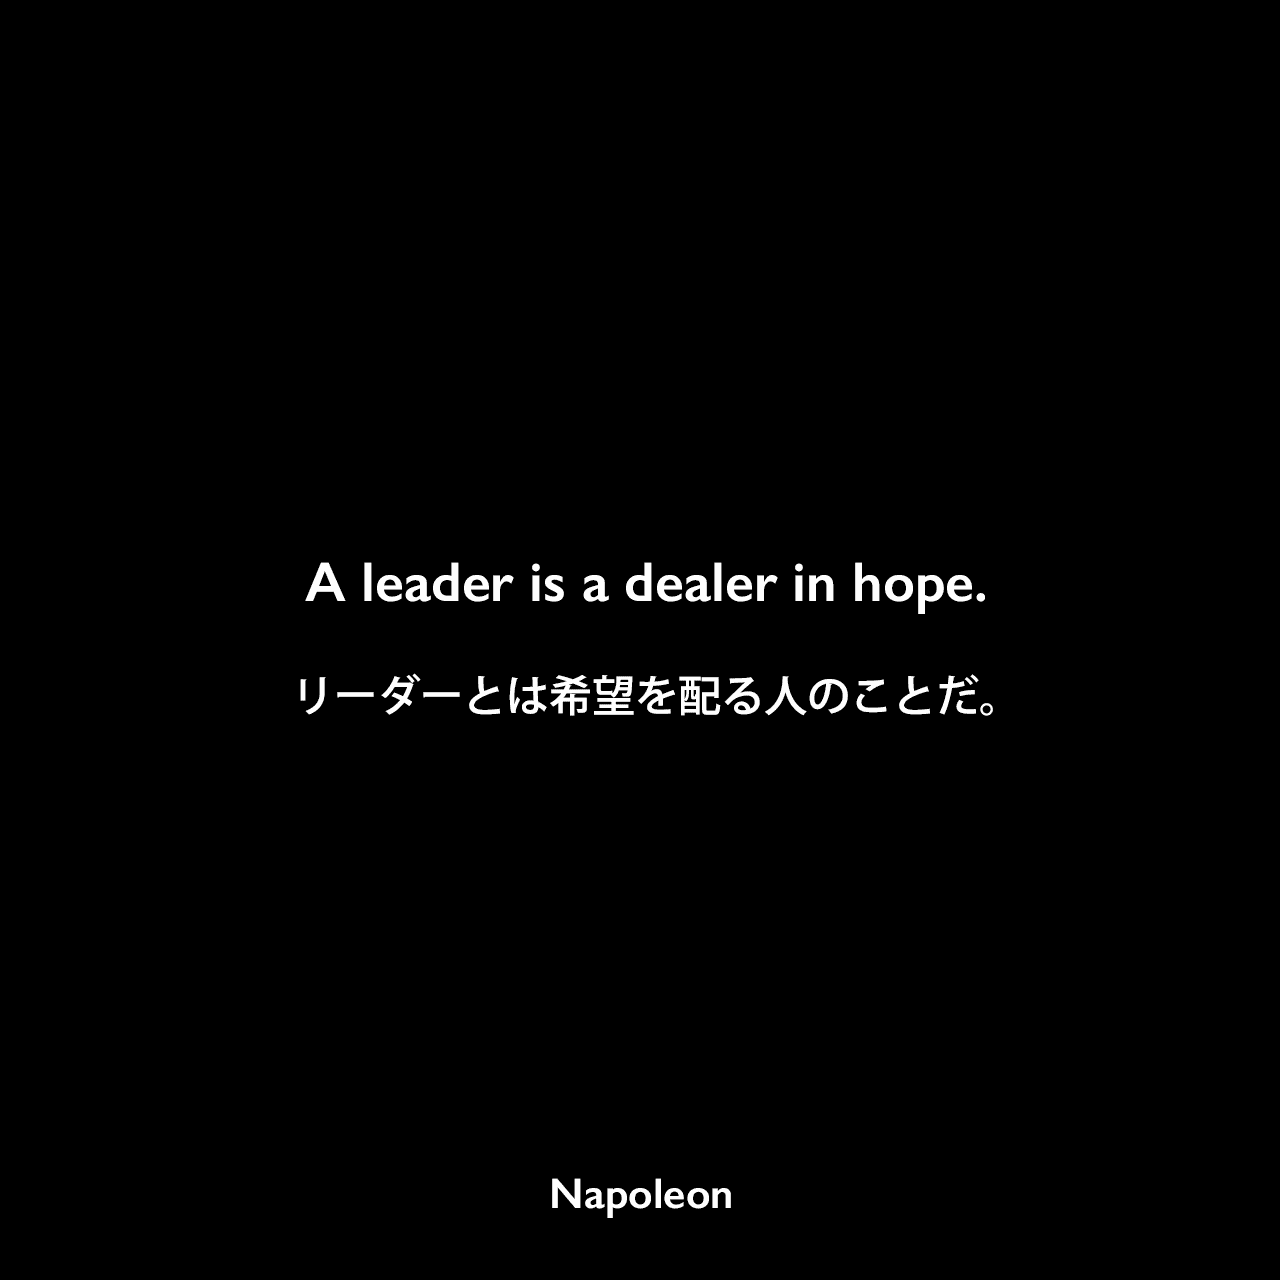 A leader is a dealer in hope.リーダーとは希望を配る人のことだ。